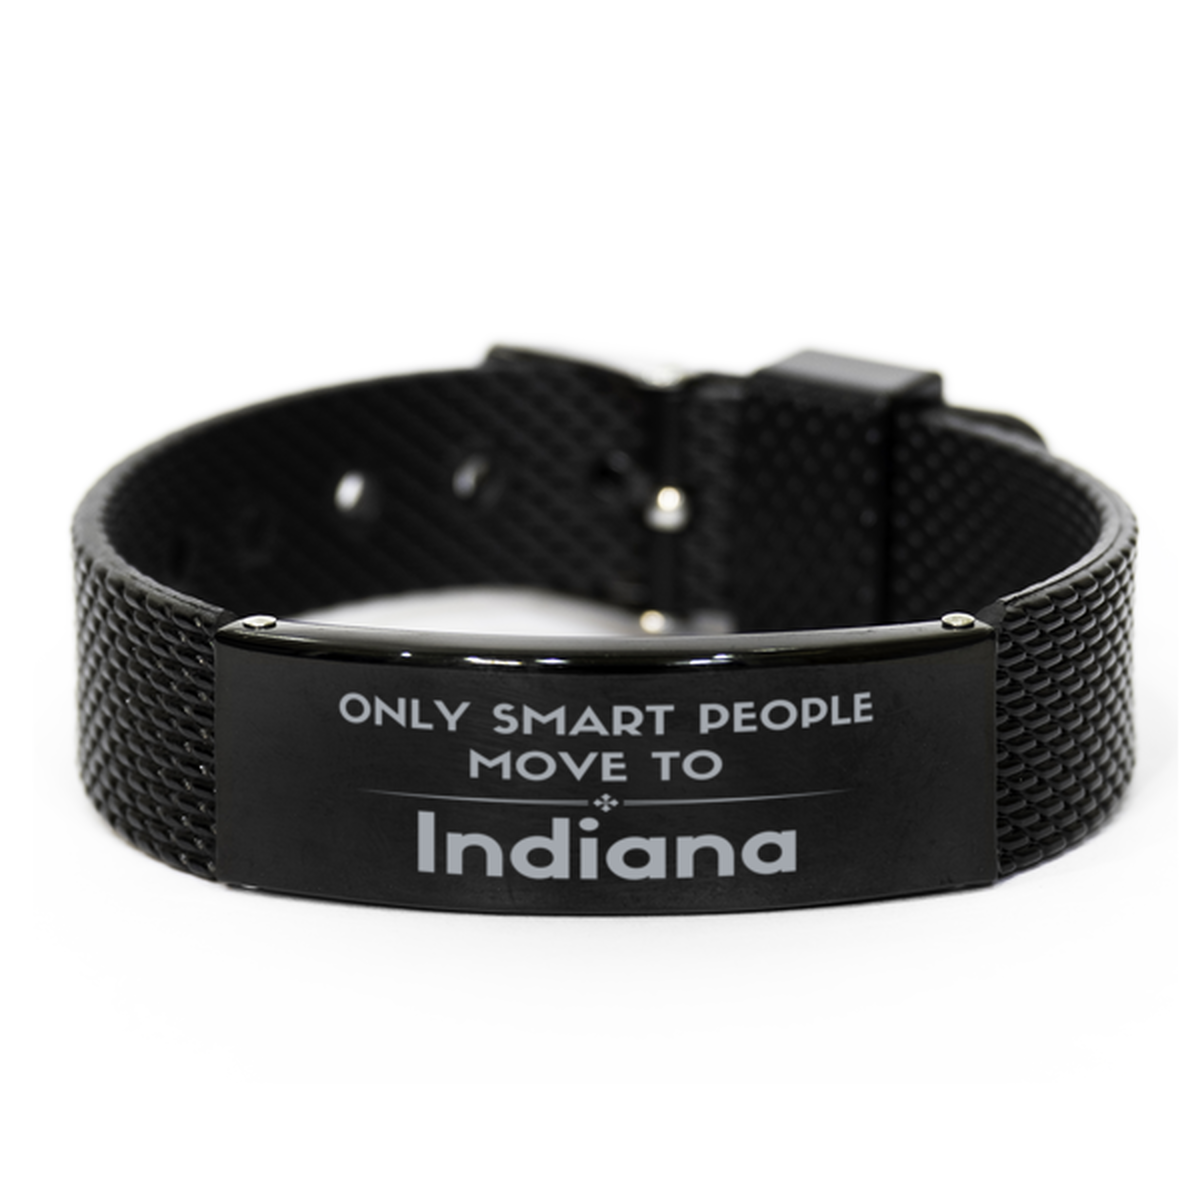 Only smart people move to Indiana Black Shark Mesh Bracelet, Gag Gifts For Indiana, Move to Indiana Gifts for Friends Coworker Funny Saying Quote